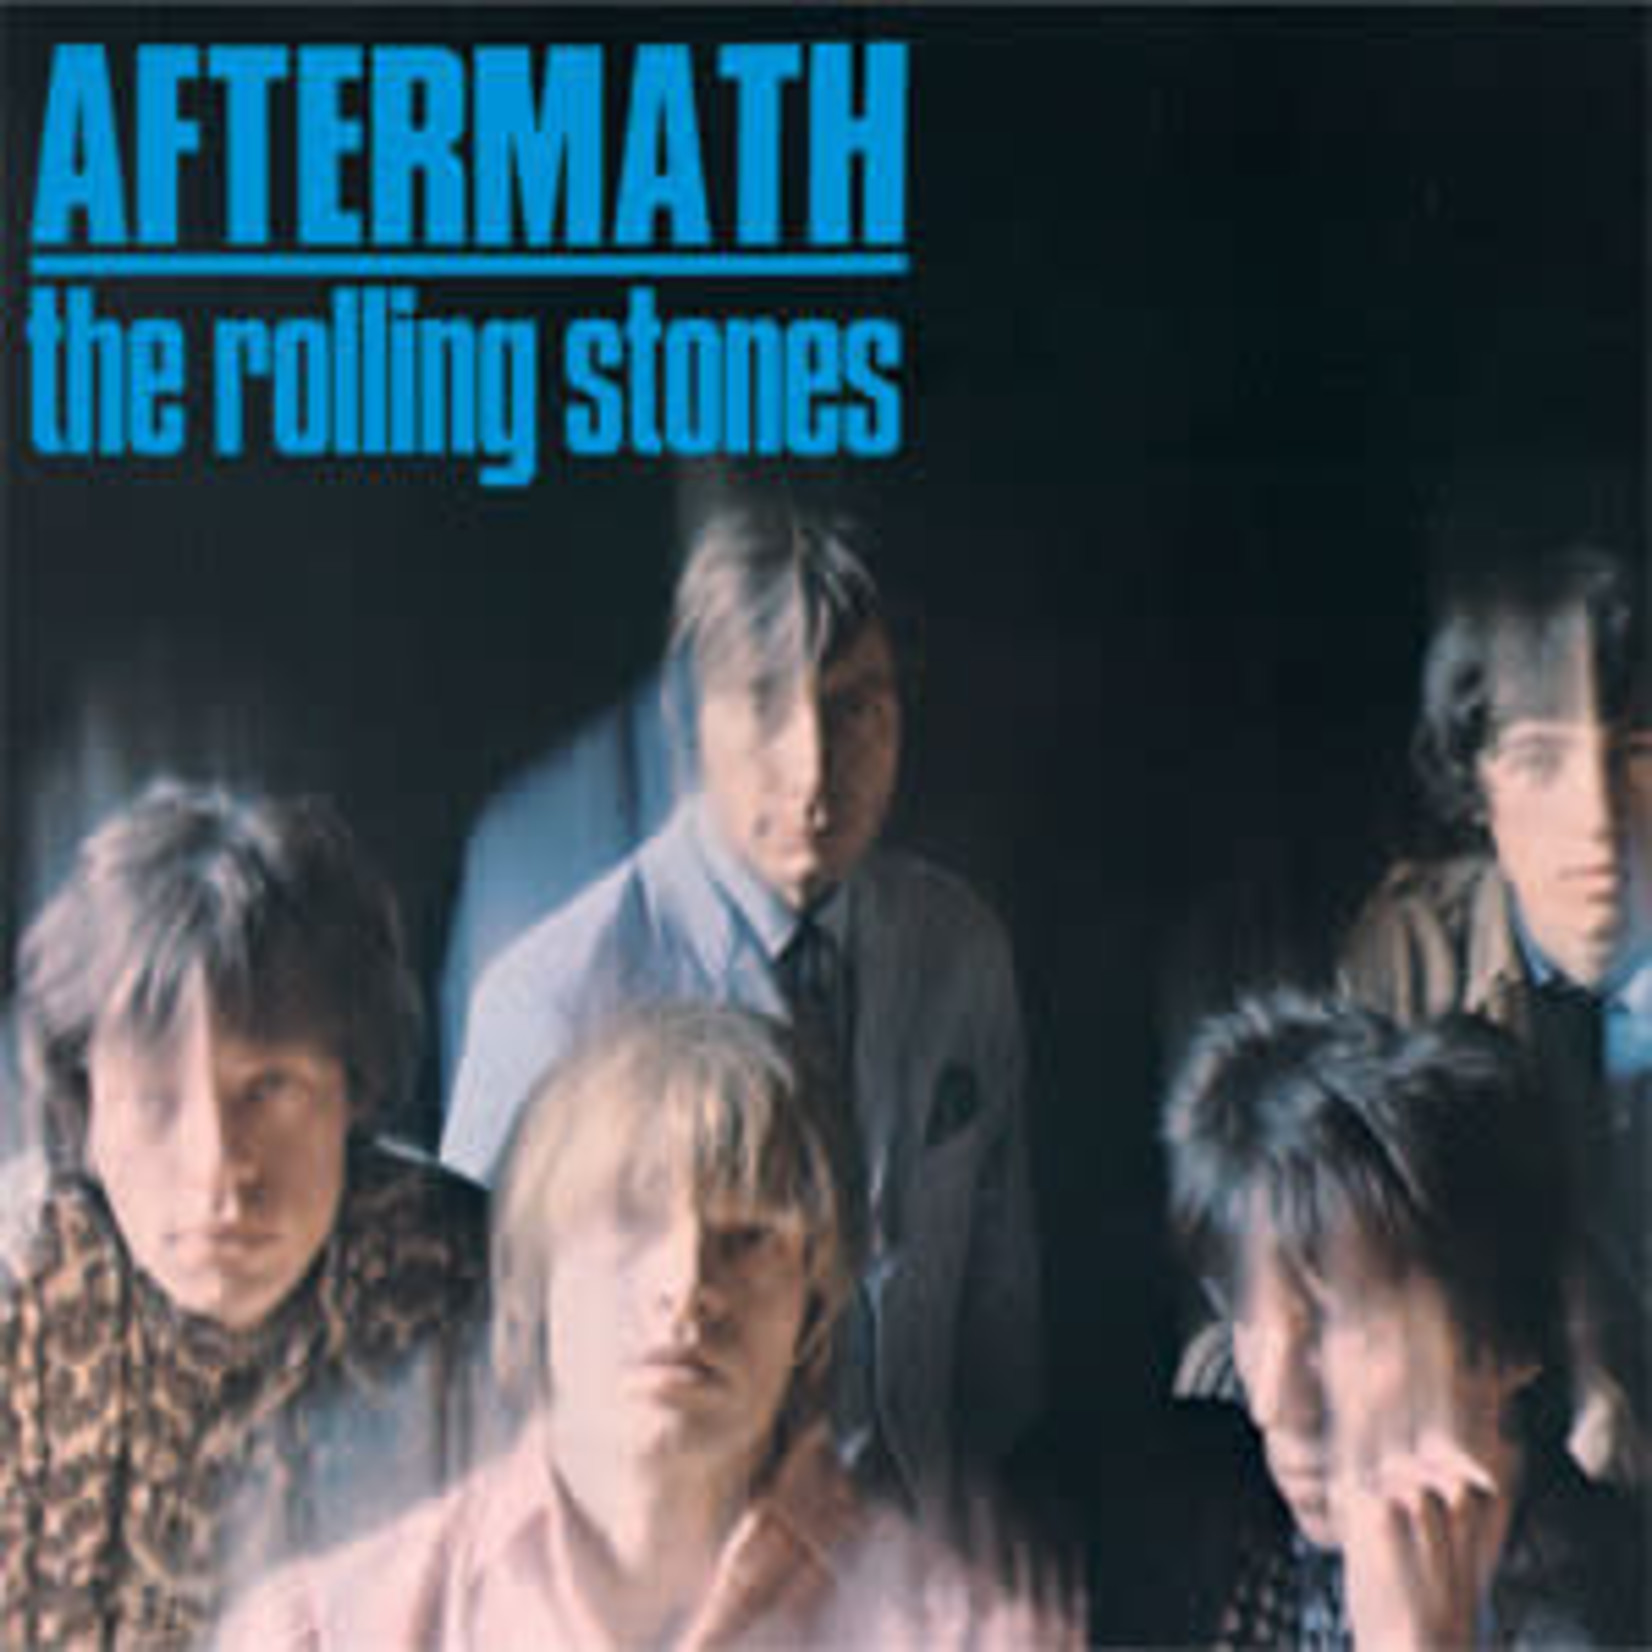 [New] Rolling Stones - Aftermath (US version, 180g)